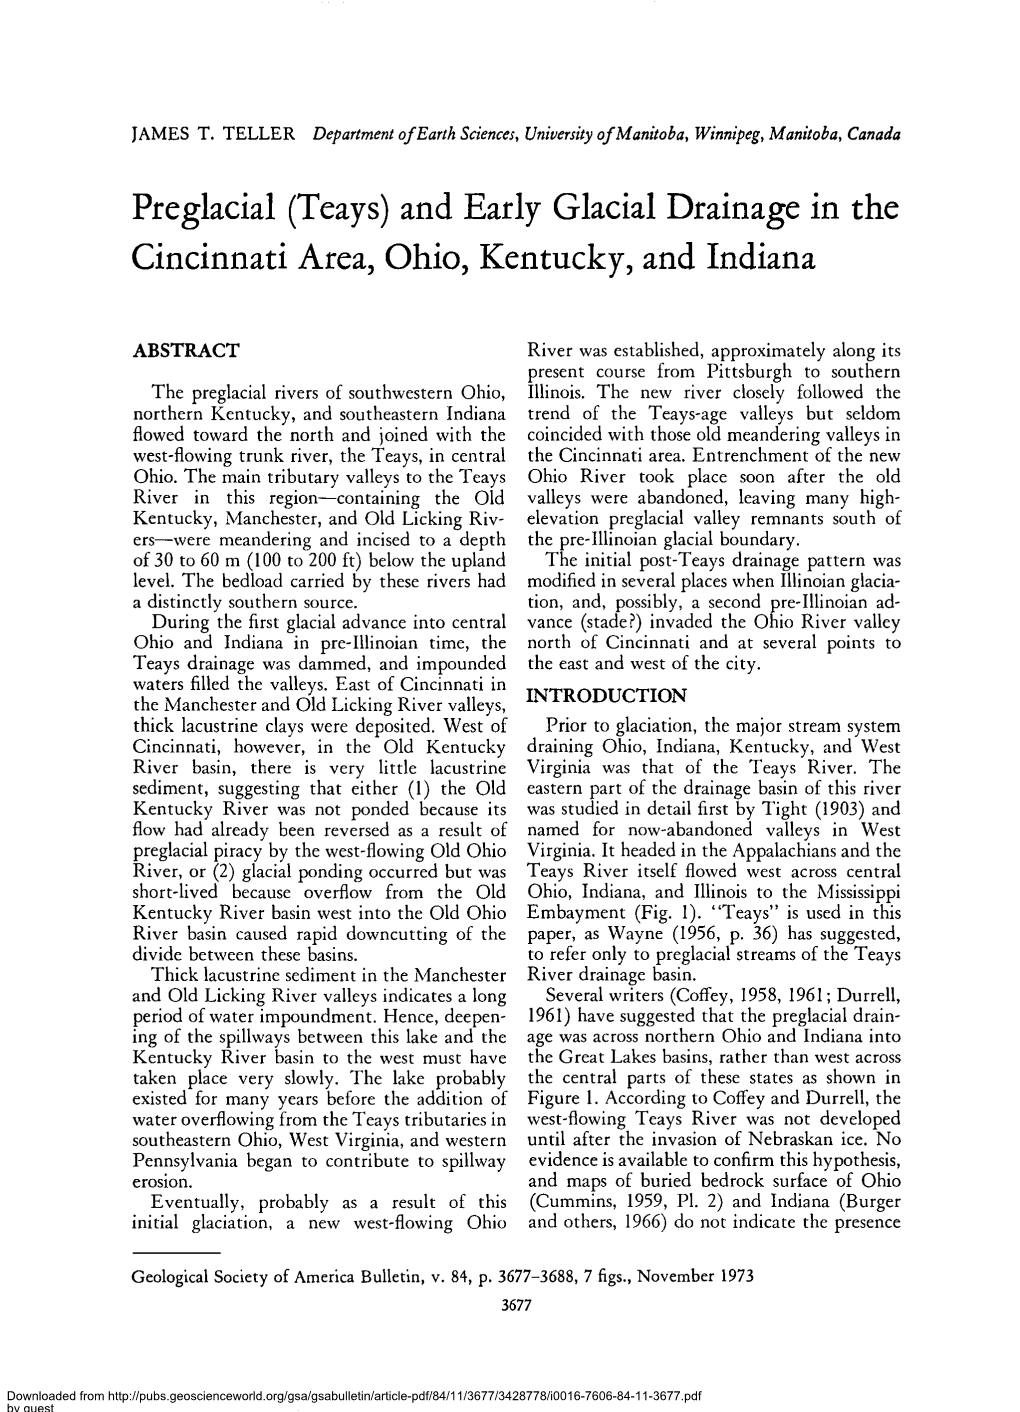 Preglacial (Teays) and Early Glacial Drainage in the Cincinnati Area, Ohio, Kentucky, and Indiana